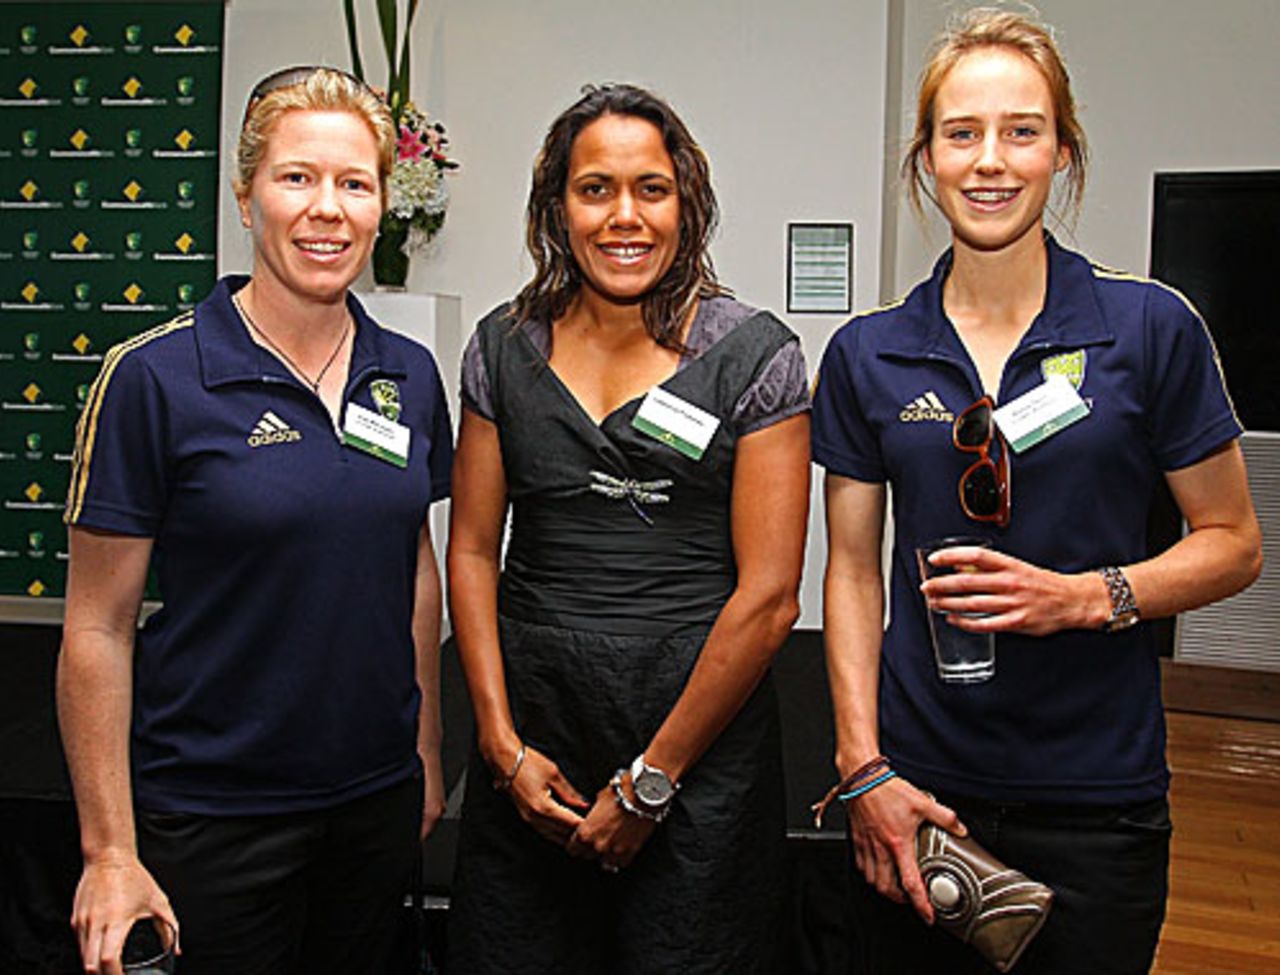 Alex Blackwell and Ellyse Perry pose with Olympian Cathy Freeman, Melbourne, February 19, 2010